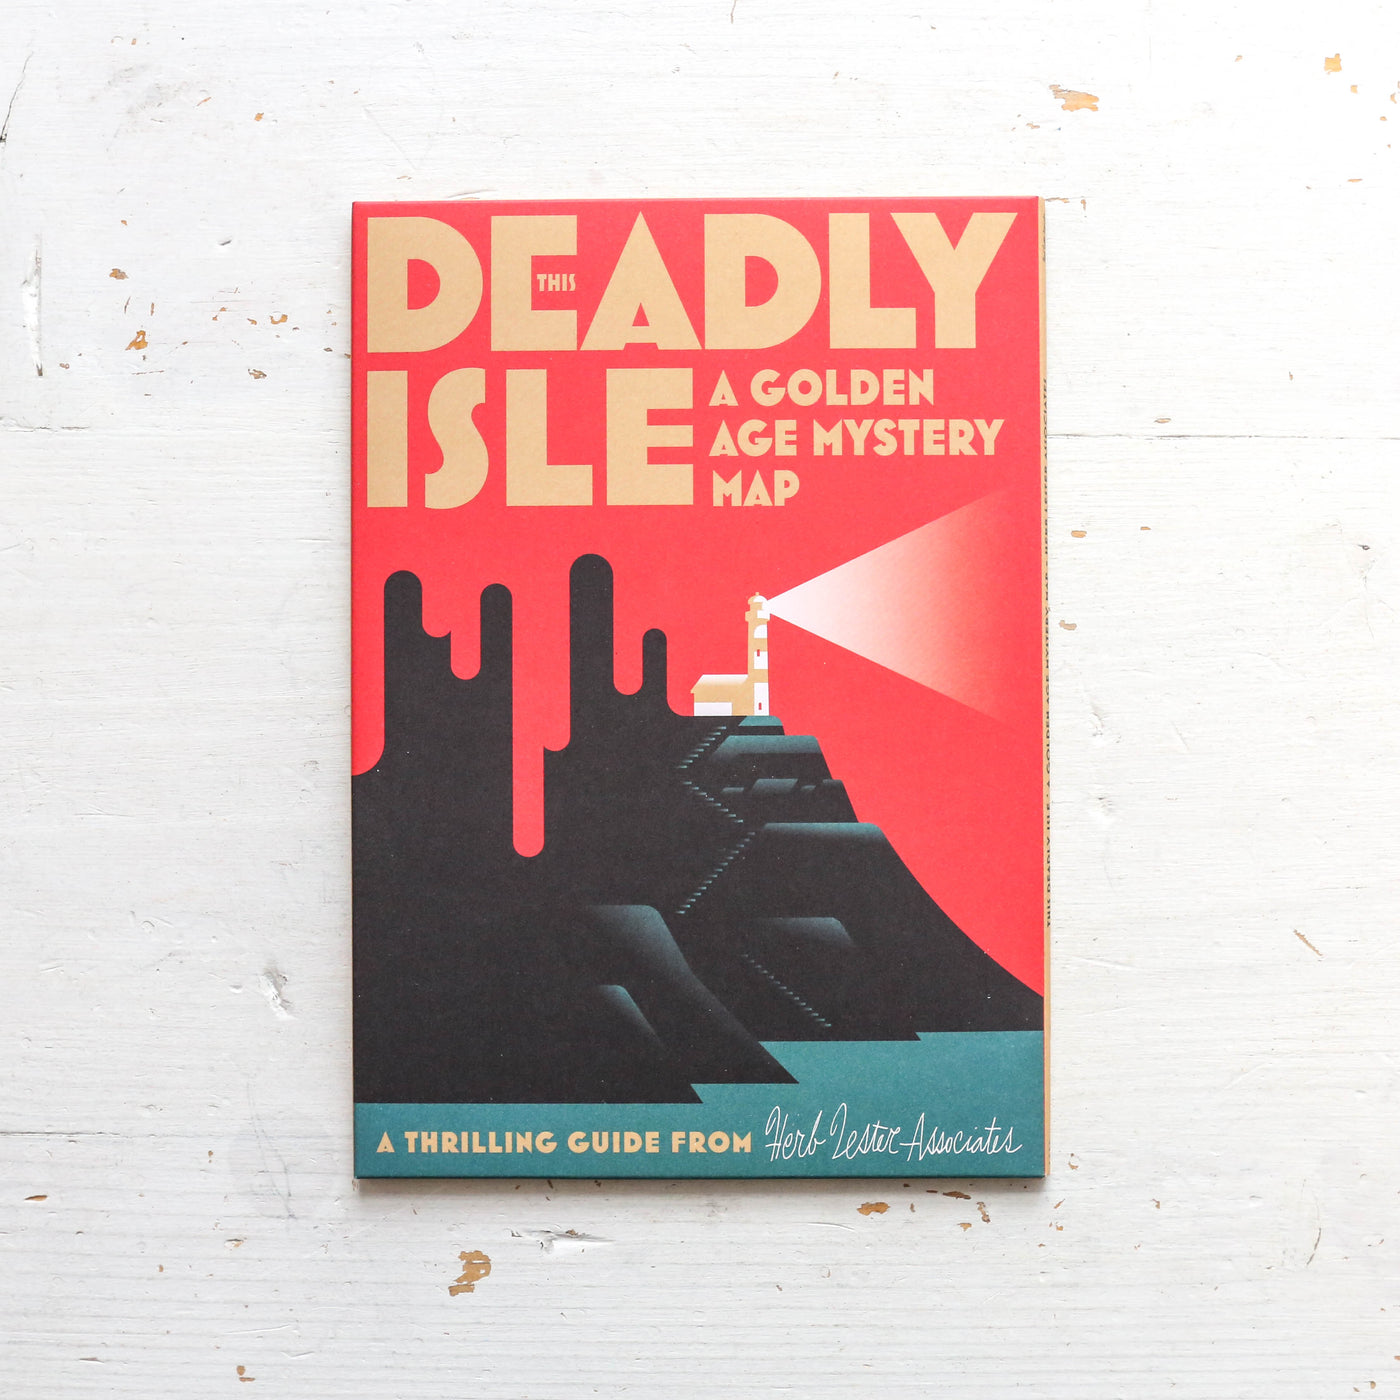 This Deadly Isle Mystery Map